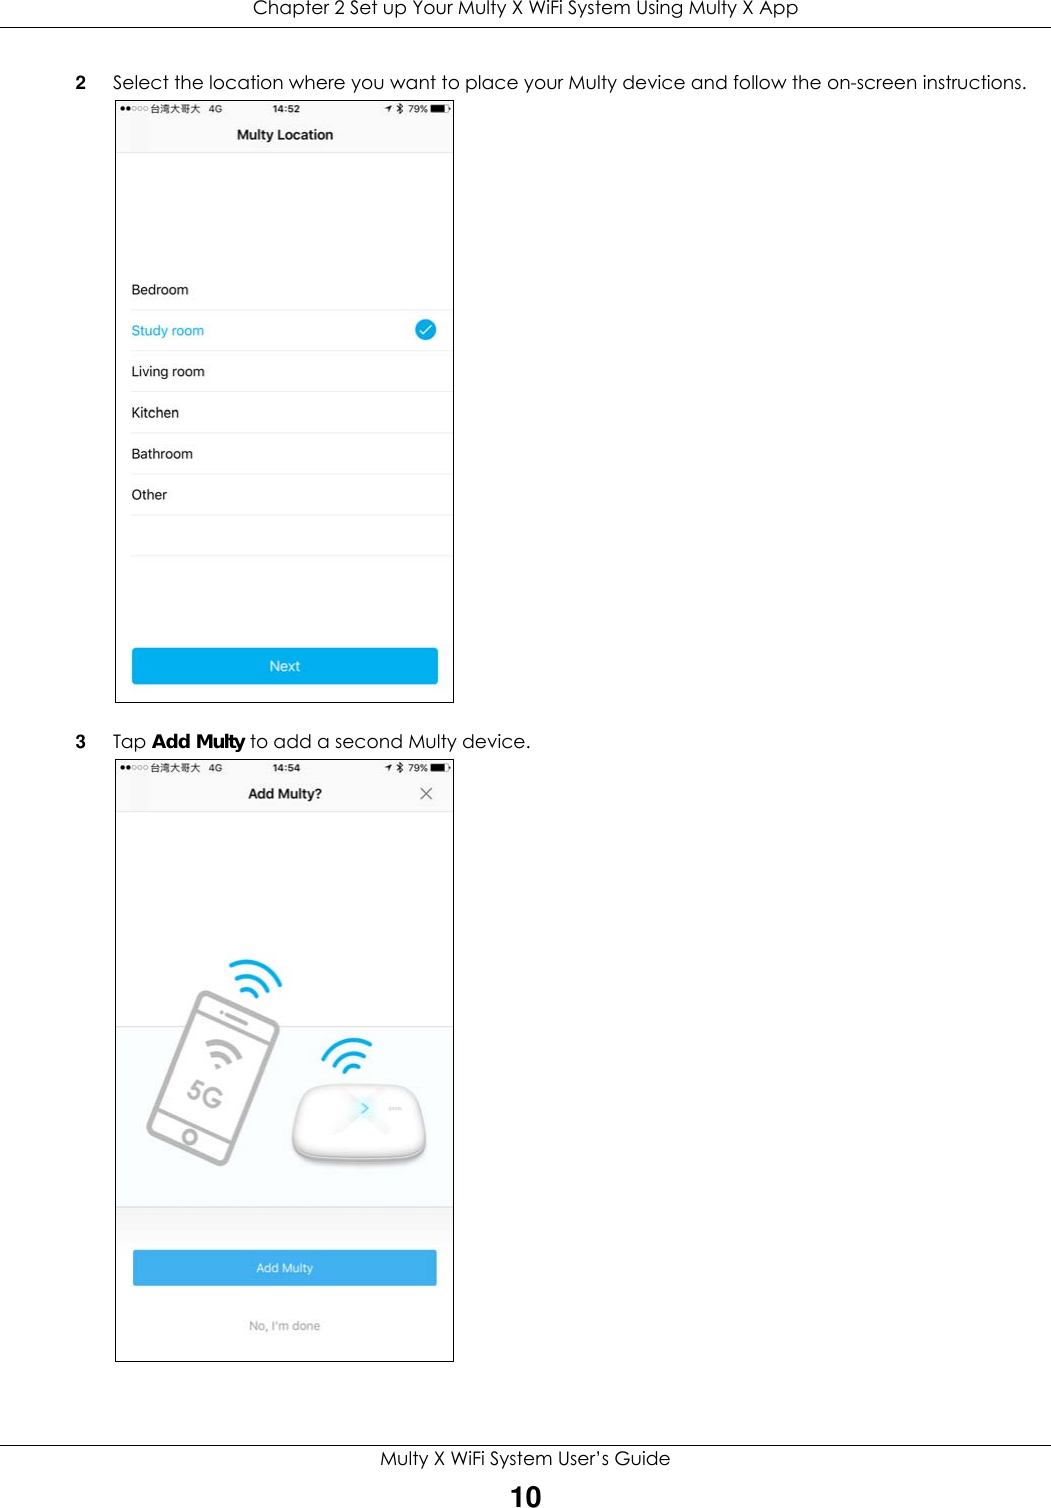 Chapter 2 Set up Your Multy X WiFi System Using Multy X AppMulty X WiFi System User’s Guide102Select the location where you want to place your Multy device and follow the on-screen instructions.3Tap Add Multy to add a second Multy device.